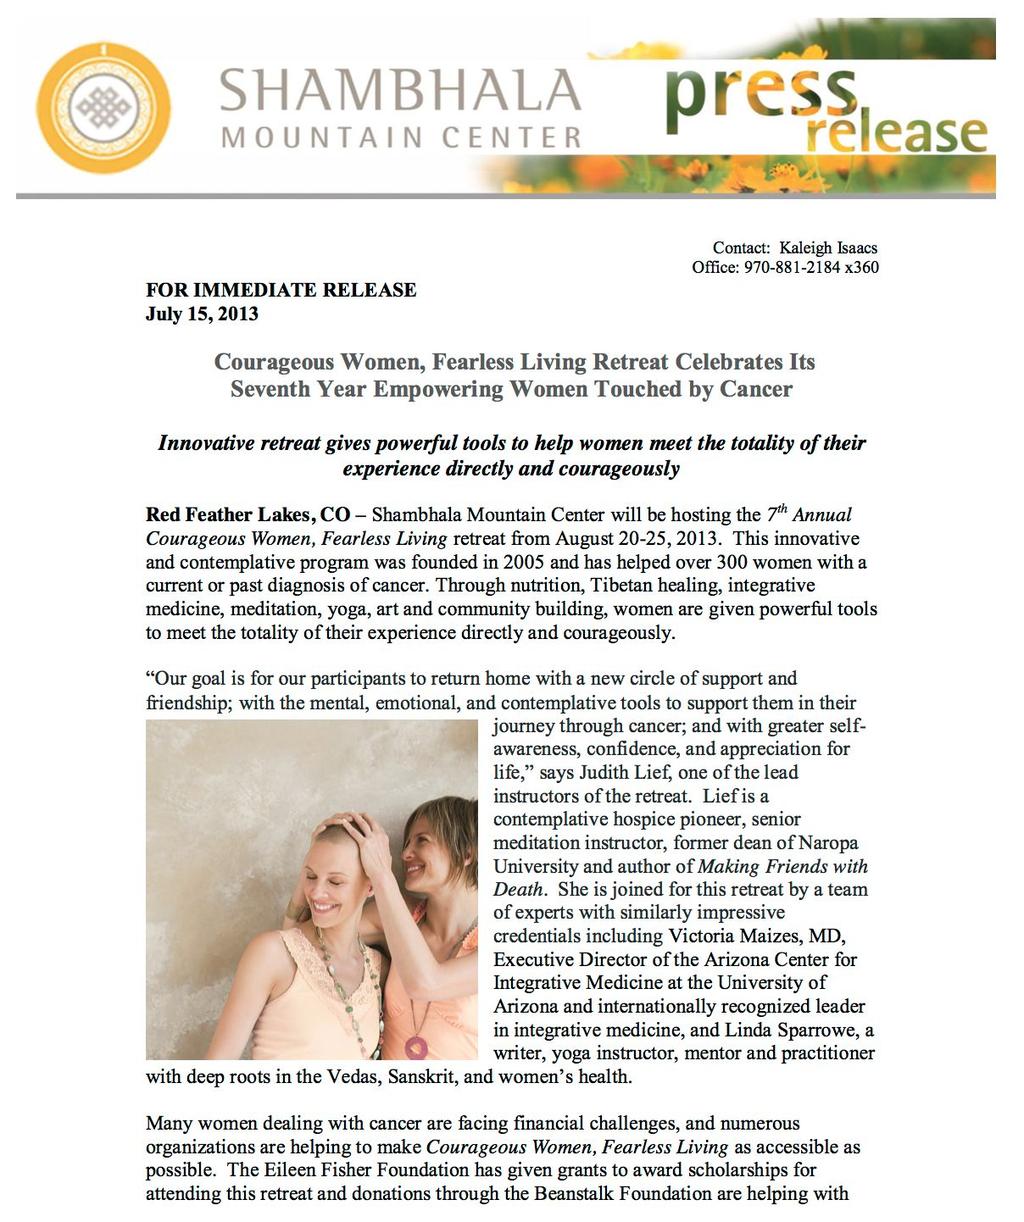 SMC IN THE NEWS CONTINUED Unique Buddhist Retreat Lies In Northern Colorado CBS Denver - Channel 4, April 2011 Top 11 Wellness Retreats Sunset - January 2011 9 Top Meditation Retreats Travel +